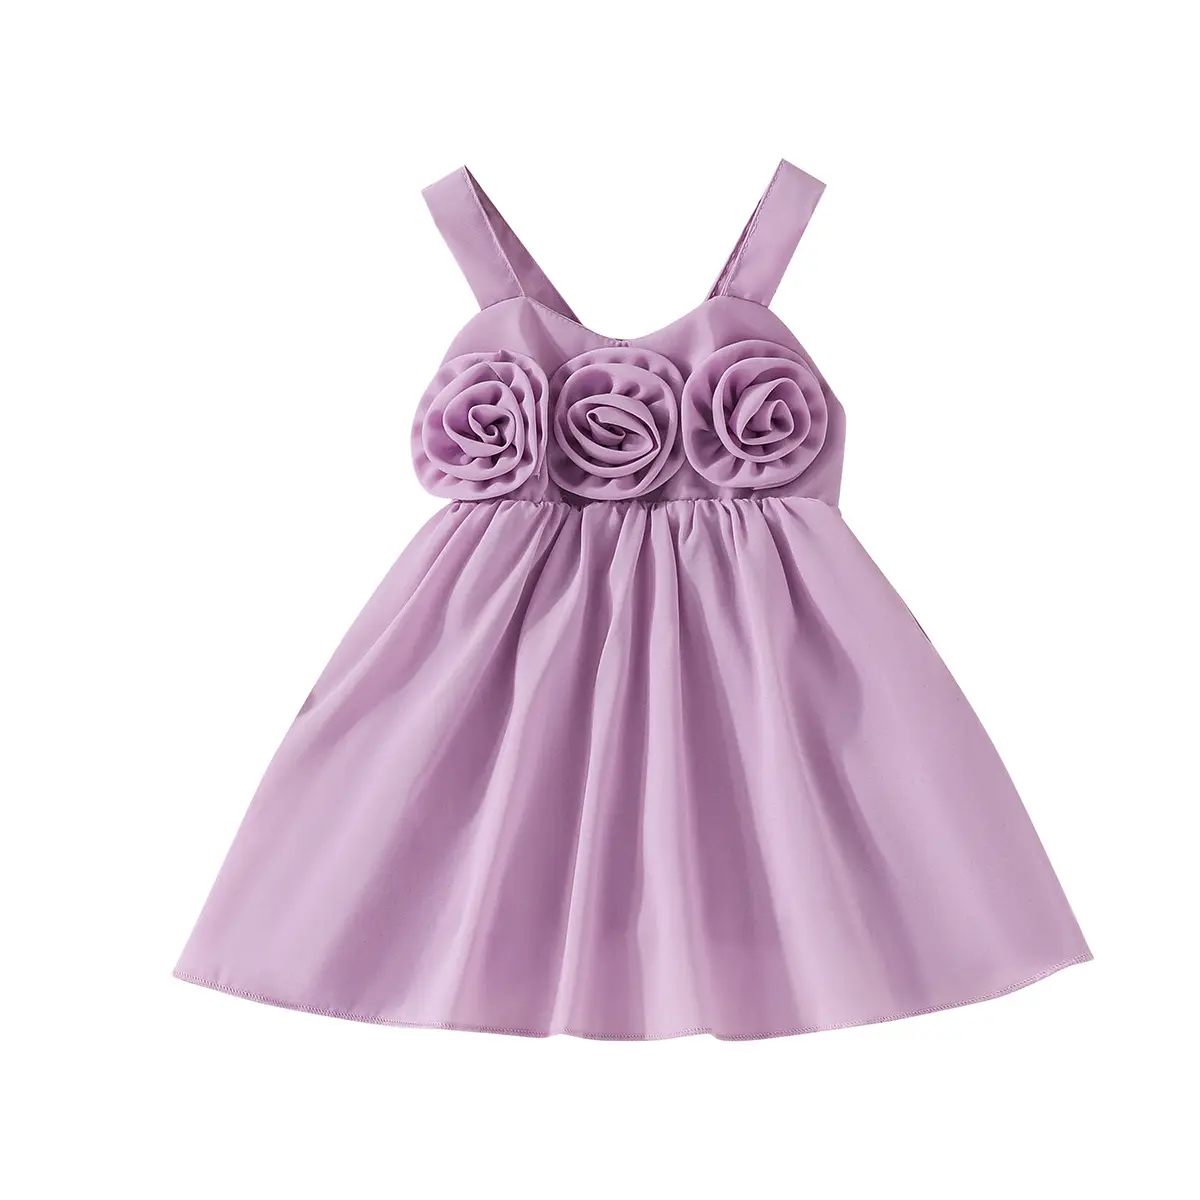 Pure color 1 anno girl baby dresses fashion baby girl birthday dress 2 anni new style dress for baby girl 6 mesi